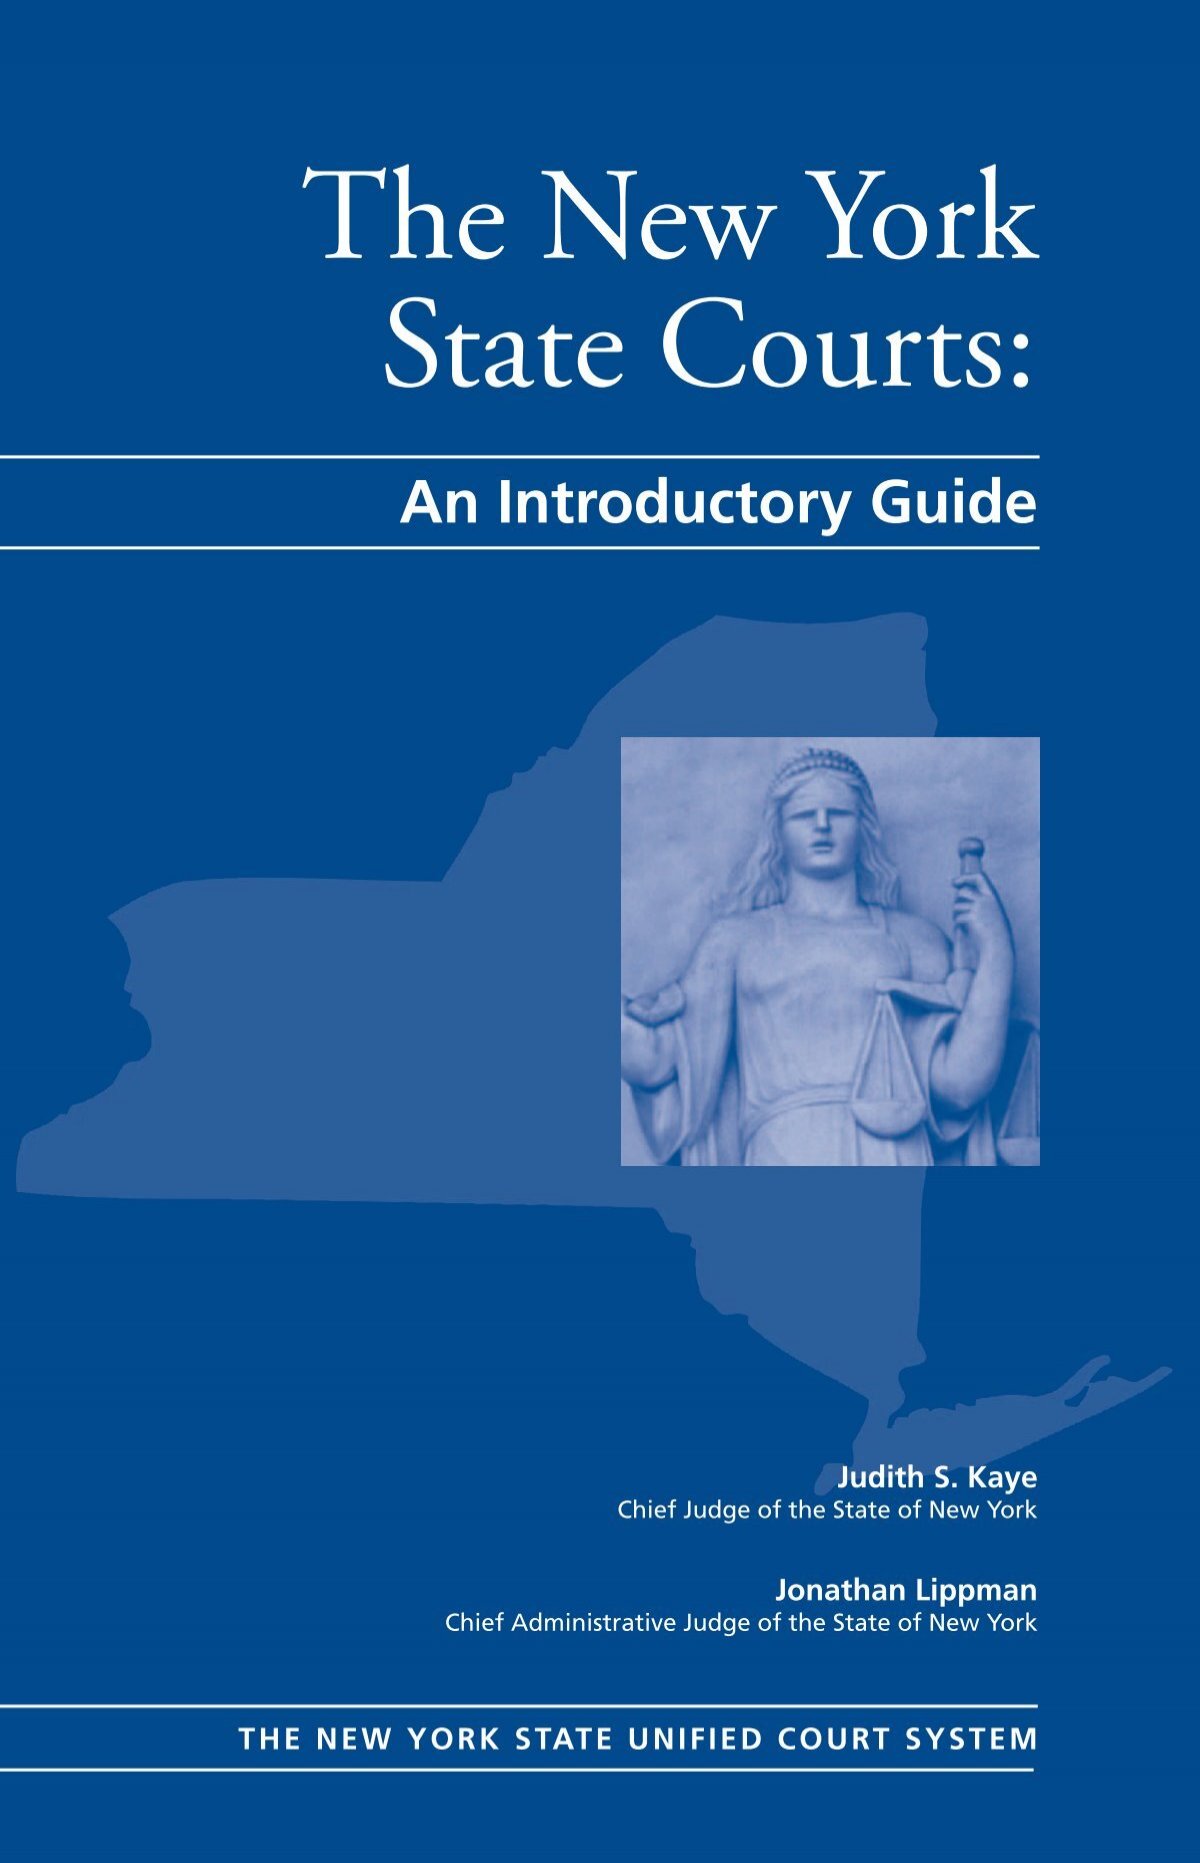 The New York State Courts: Unified Court System